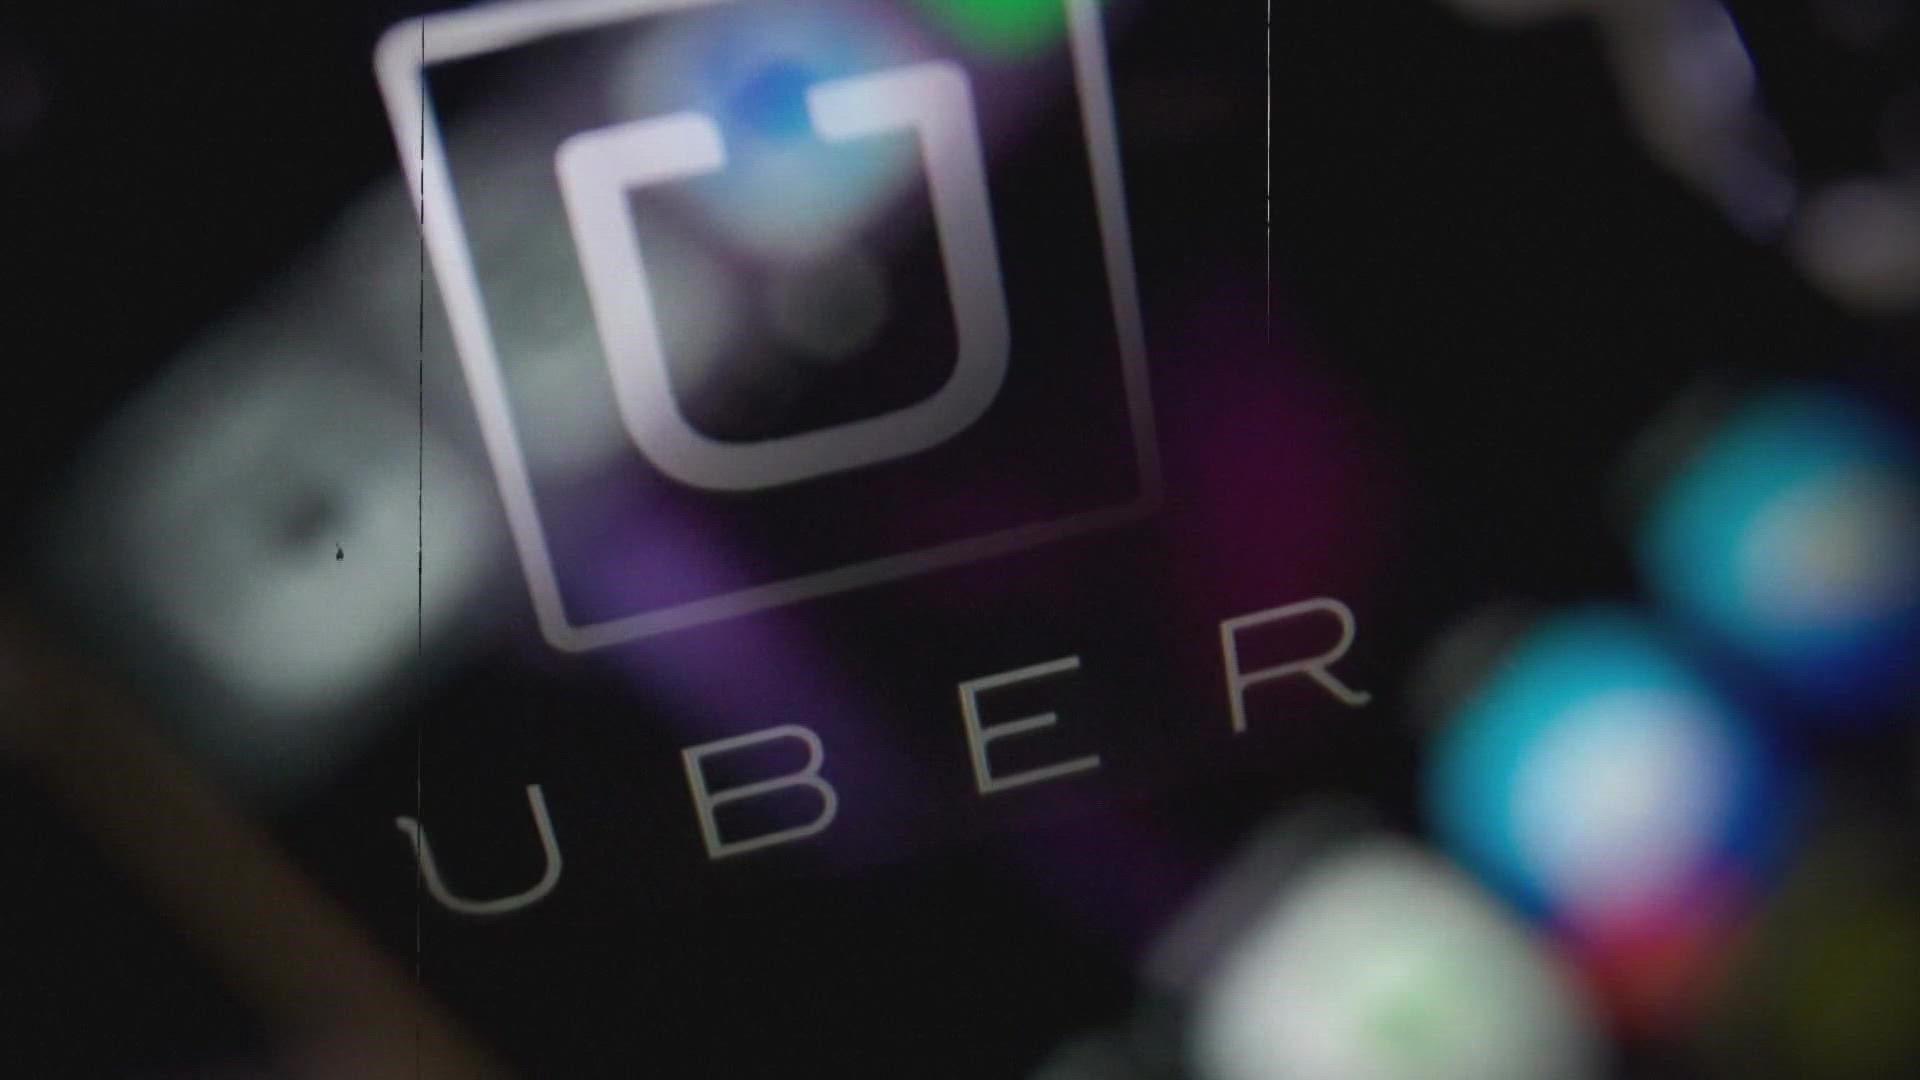 Uber says customers who feel uncomfortable will be allowed to cancel their trip